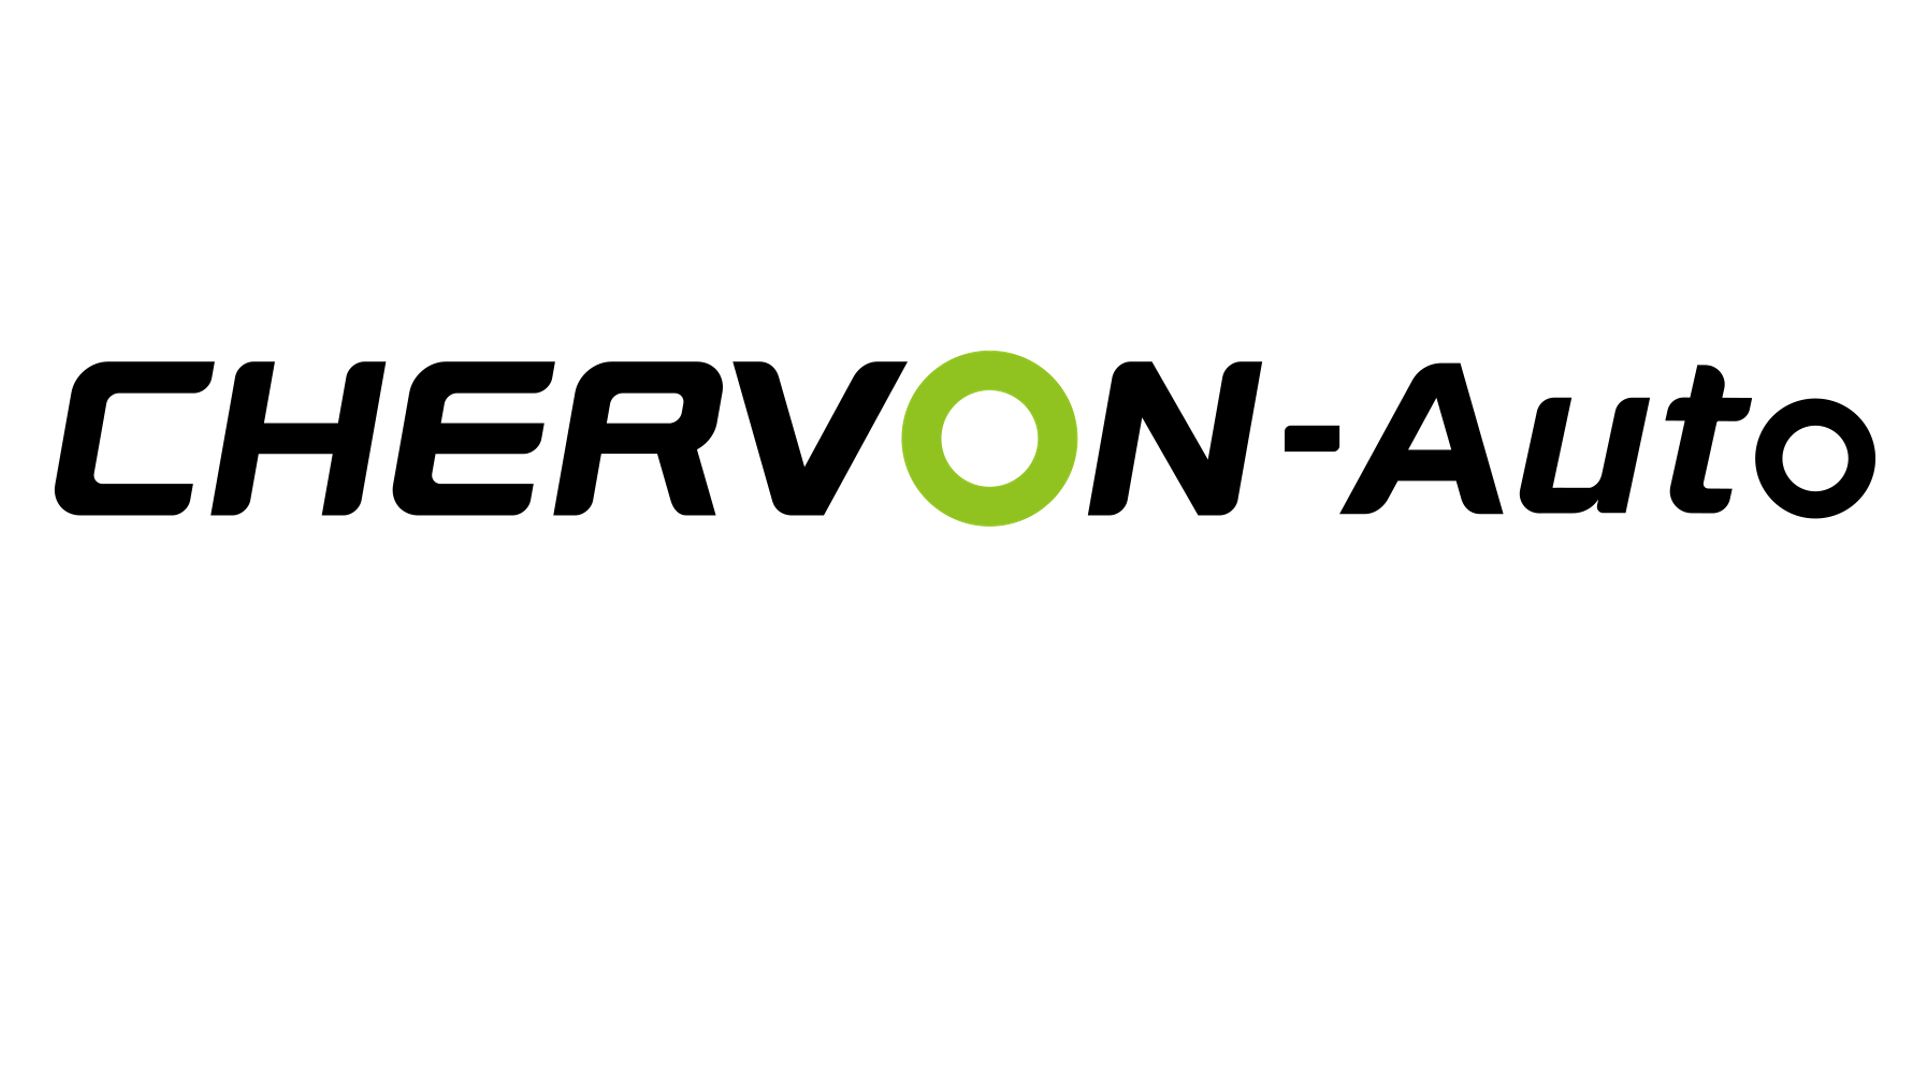 Chervon Auto establishes its first European factory in Hungary